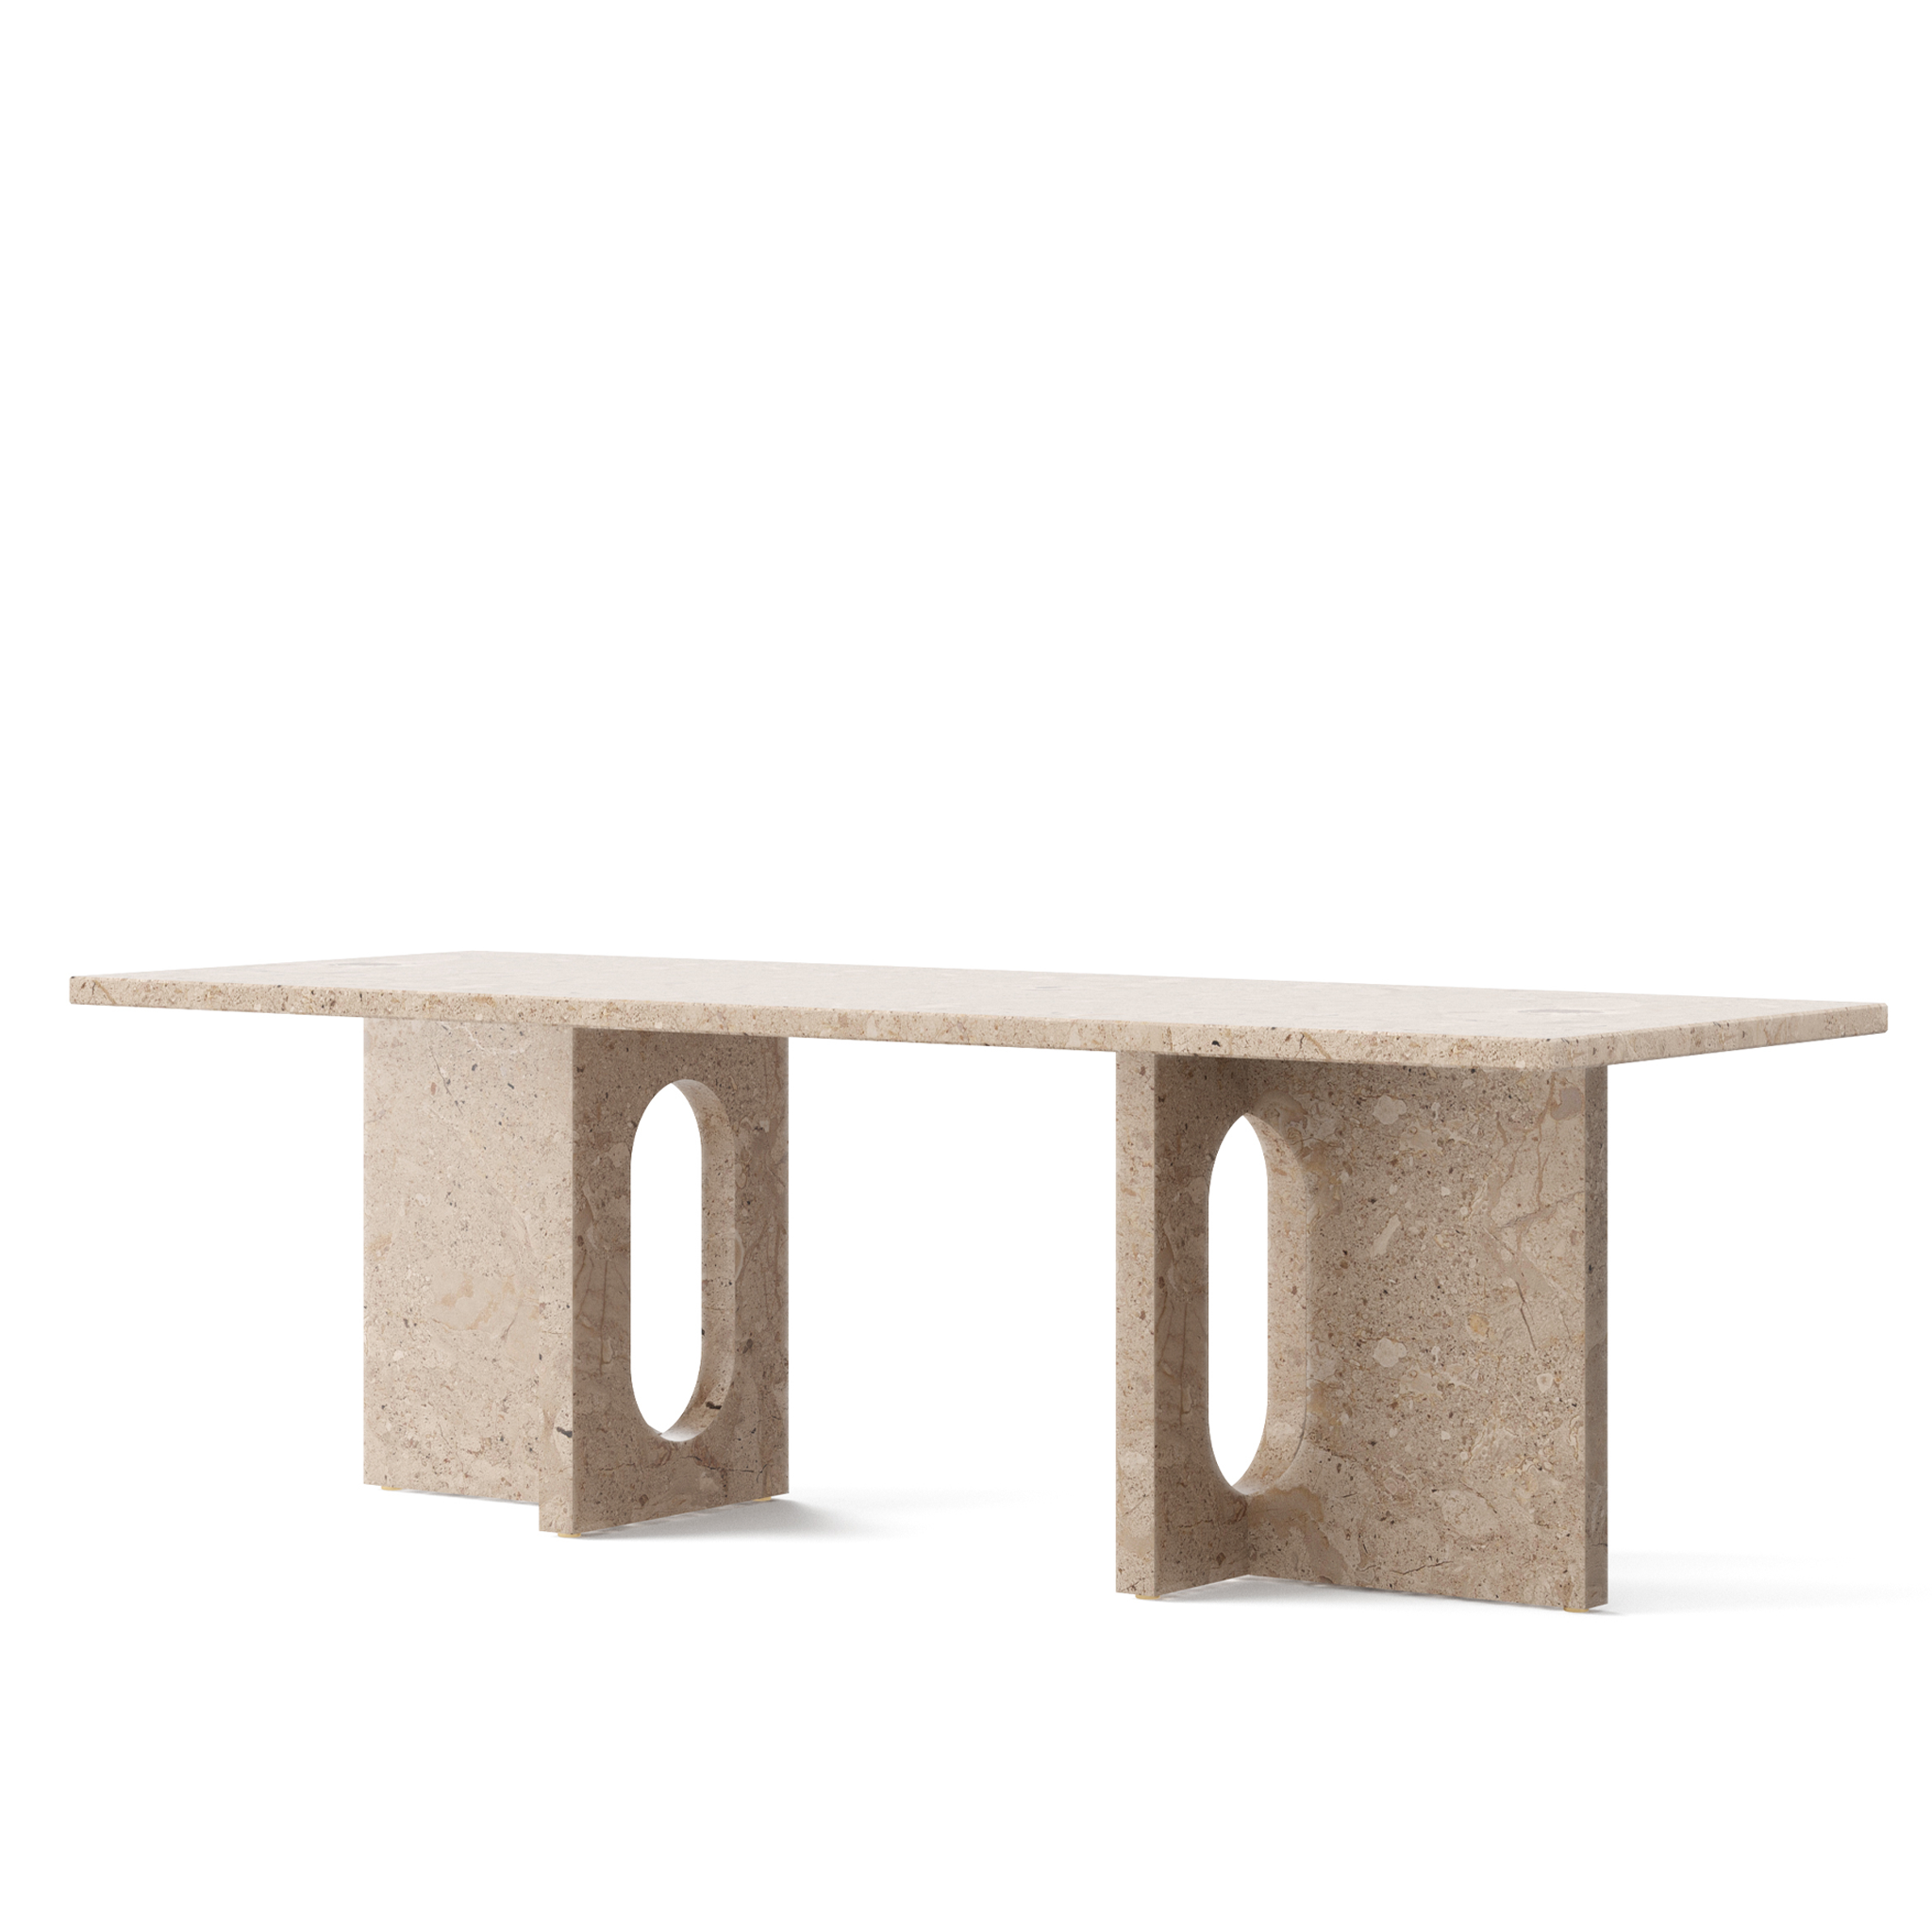 Androgyne Lounge Table - Stone by Danielle Siggerud